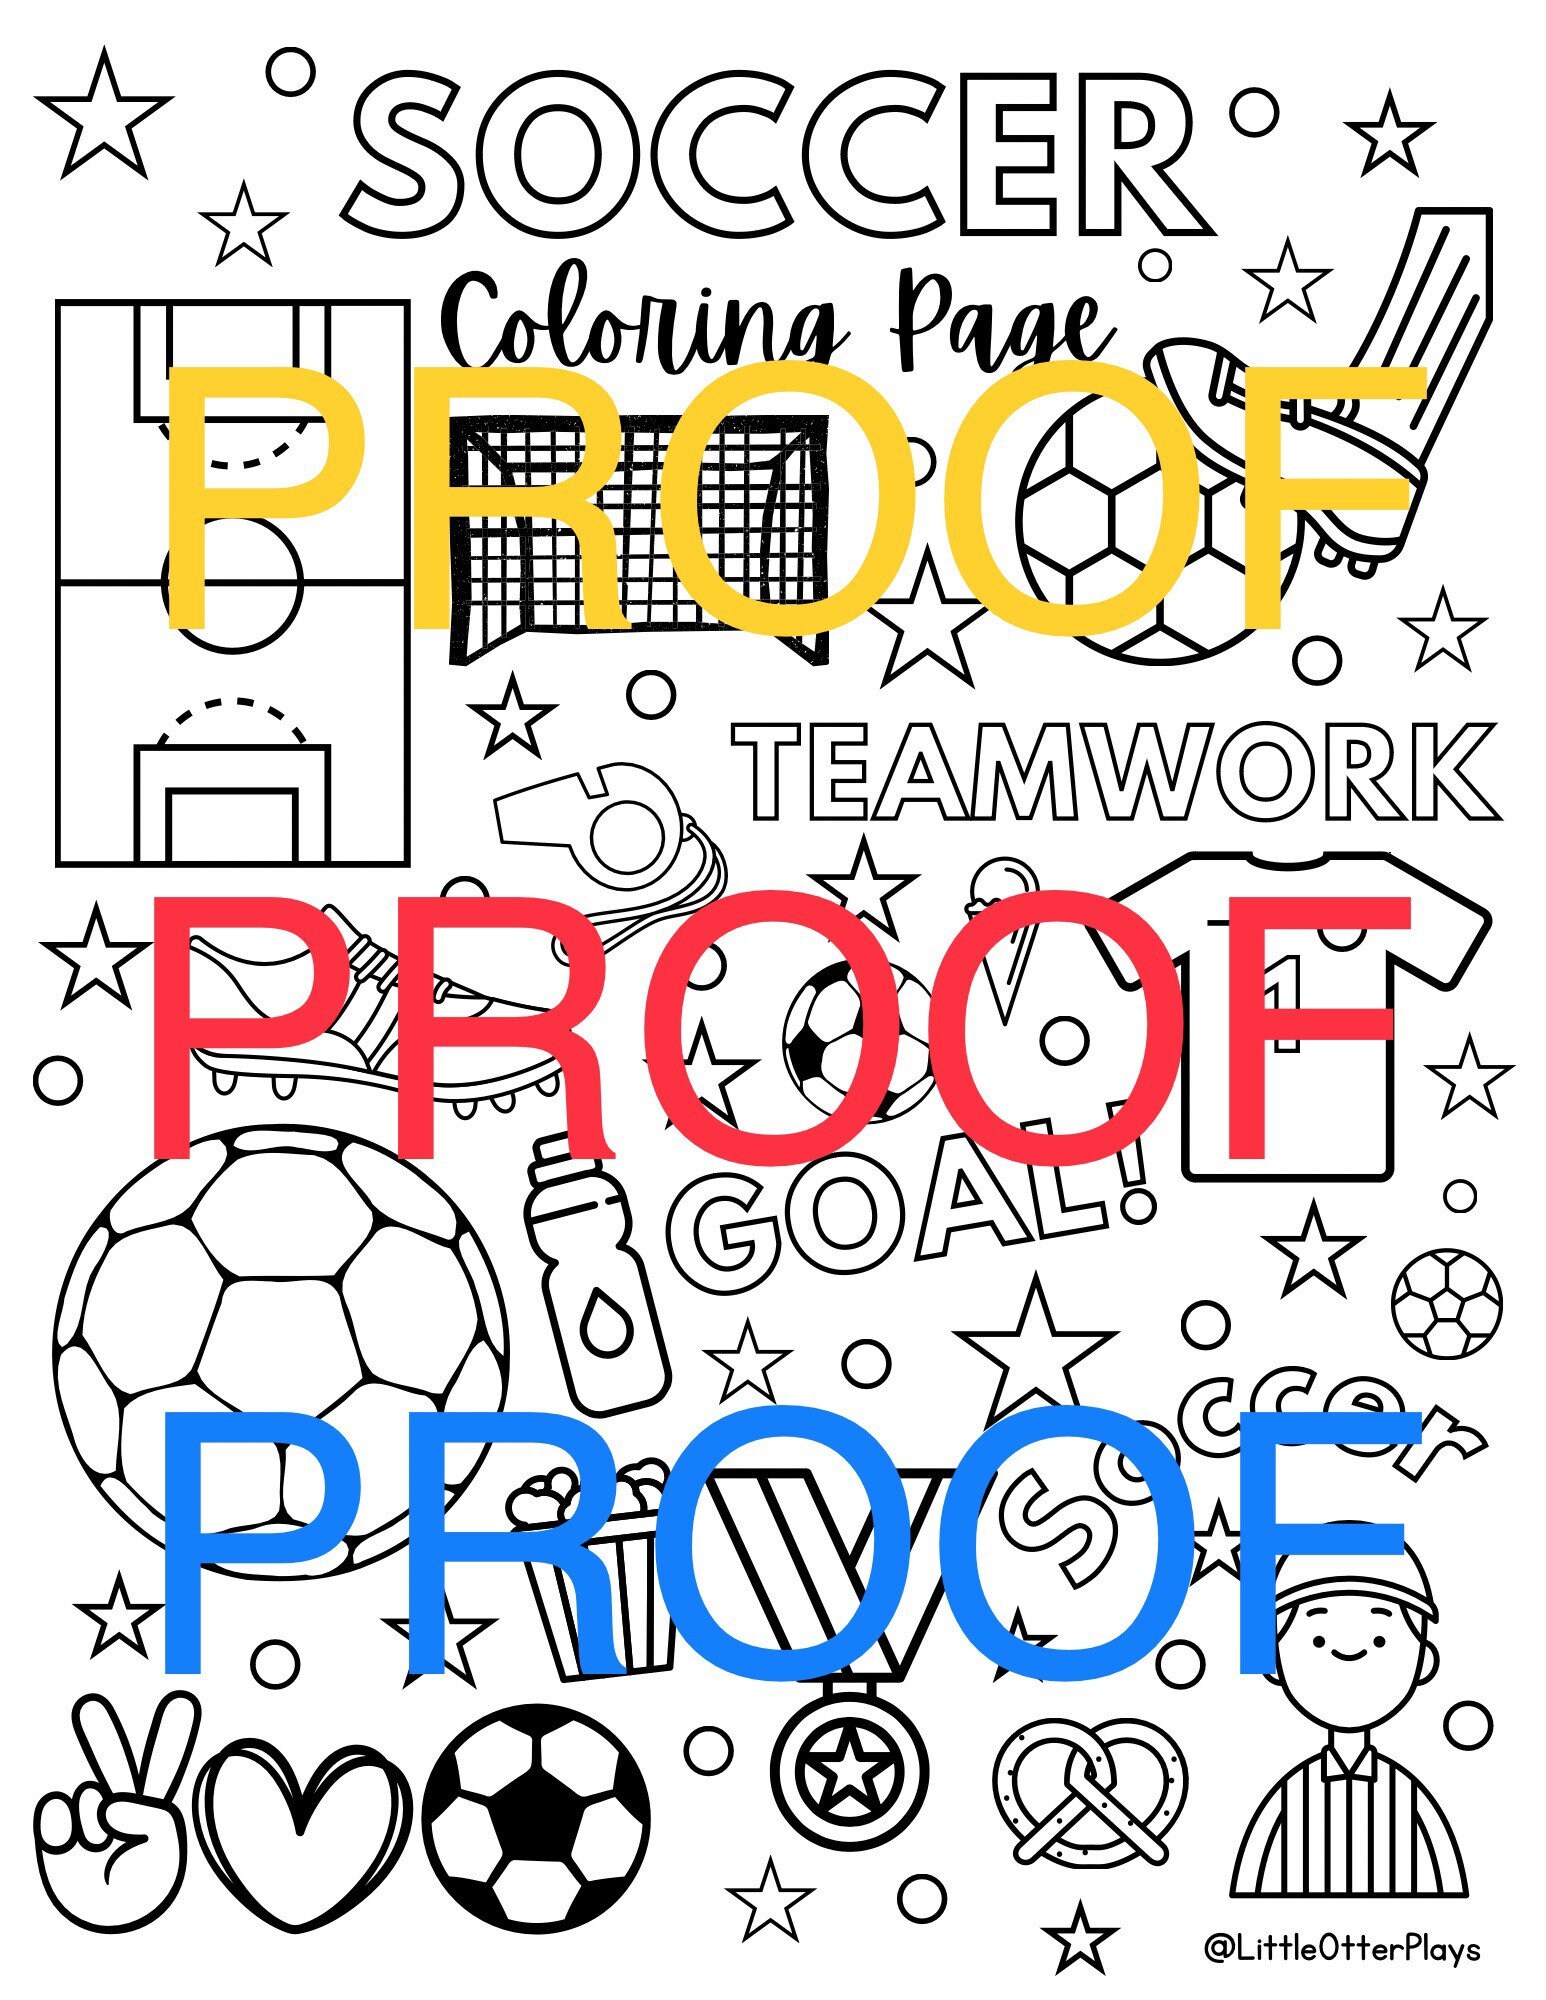 Soccer coloring sheet sports coloring sheet coloring page for kids sports activity for kids pdf file printable coloring sheet download now